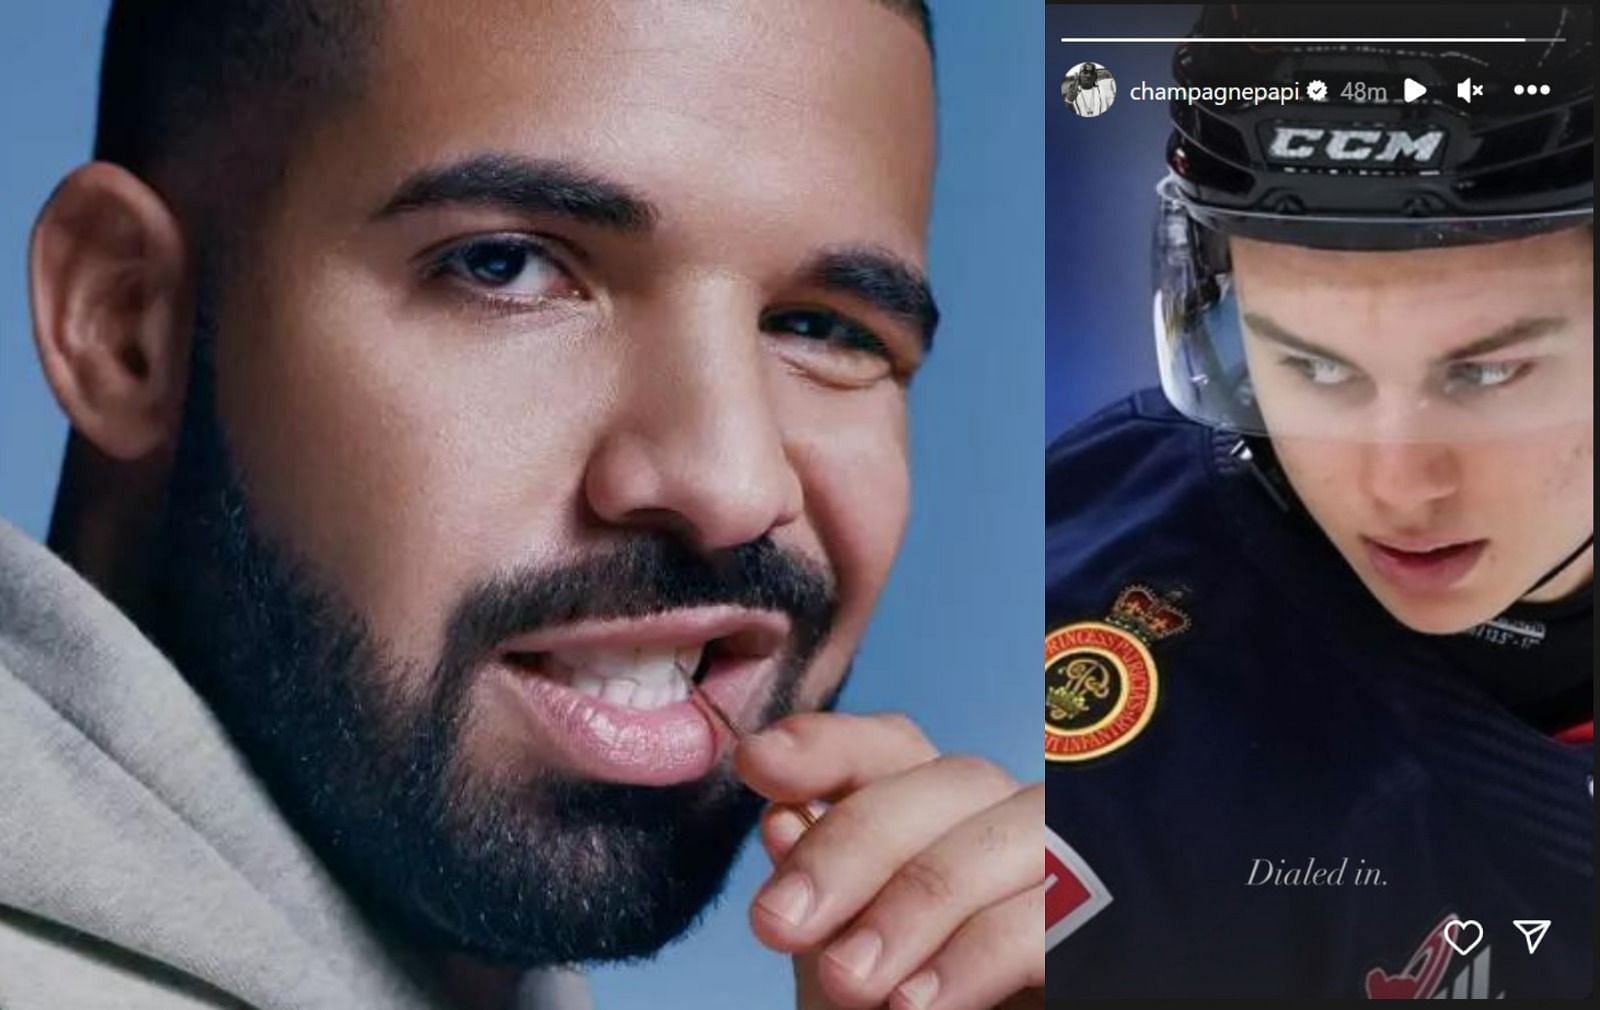 The Drake curse is coming to Chicago with rapper &quot;dialed in&quot; on Connor Bedard